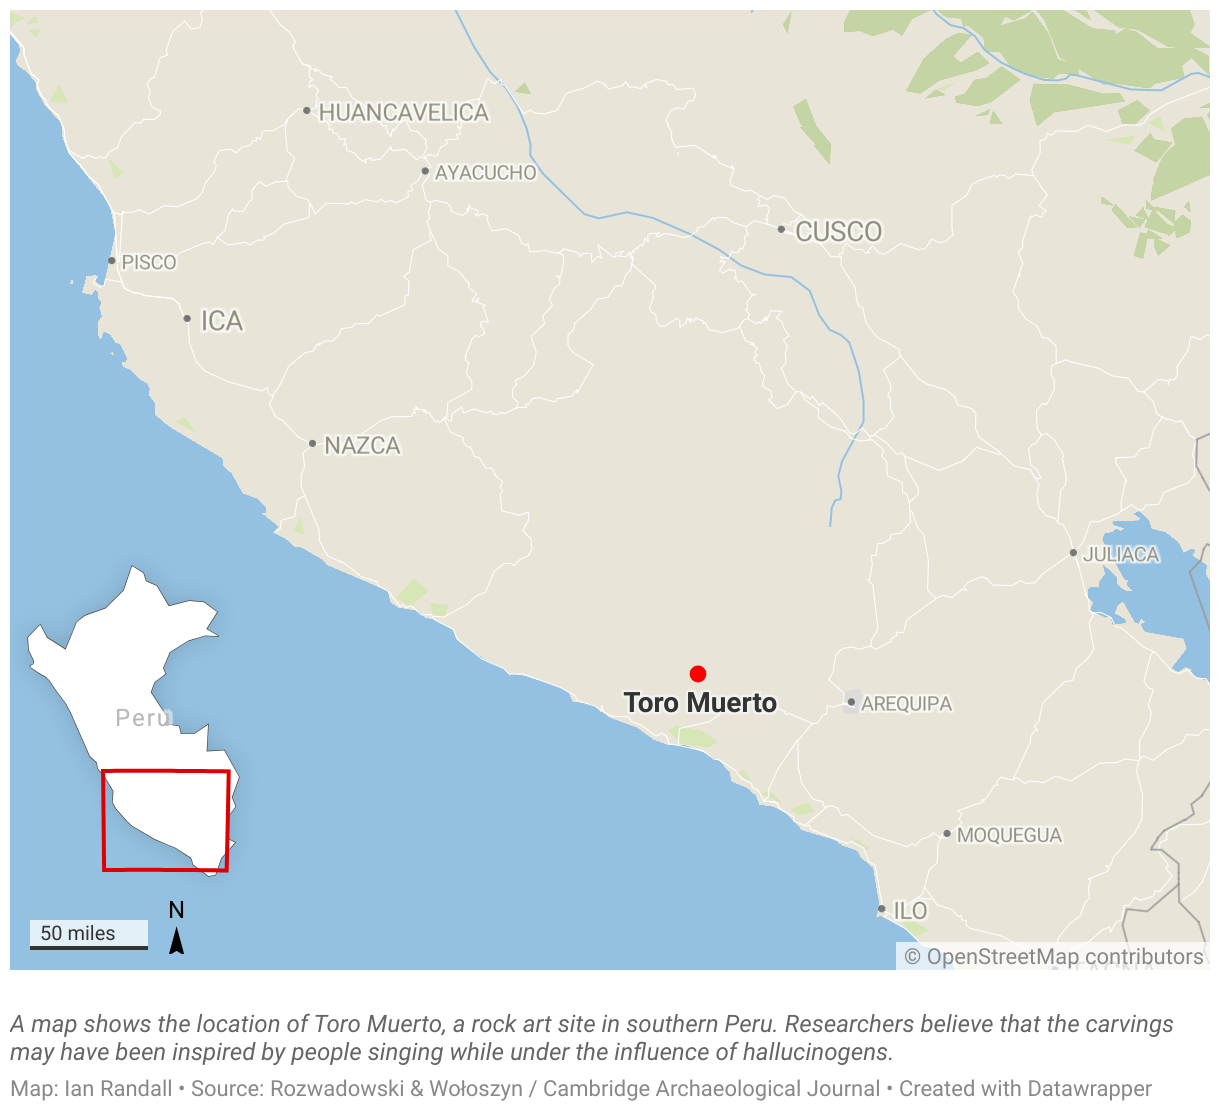 A map shows the location of Toro Muerto, a rock art site in southern Peru.